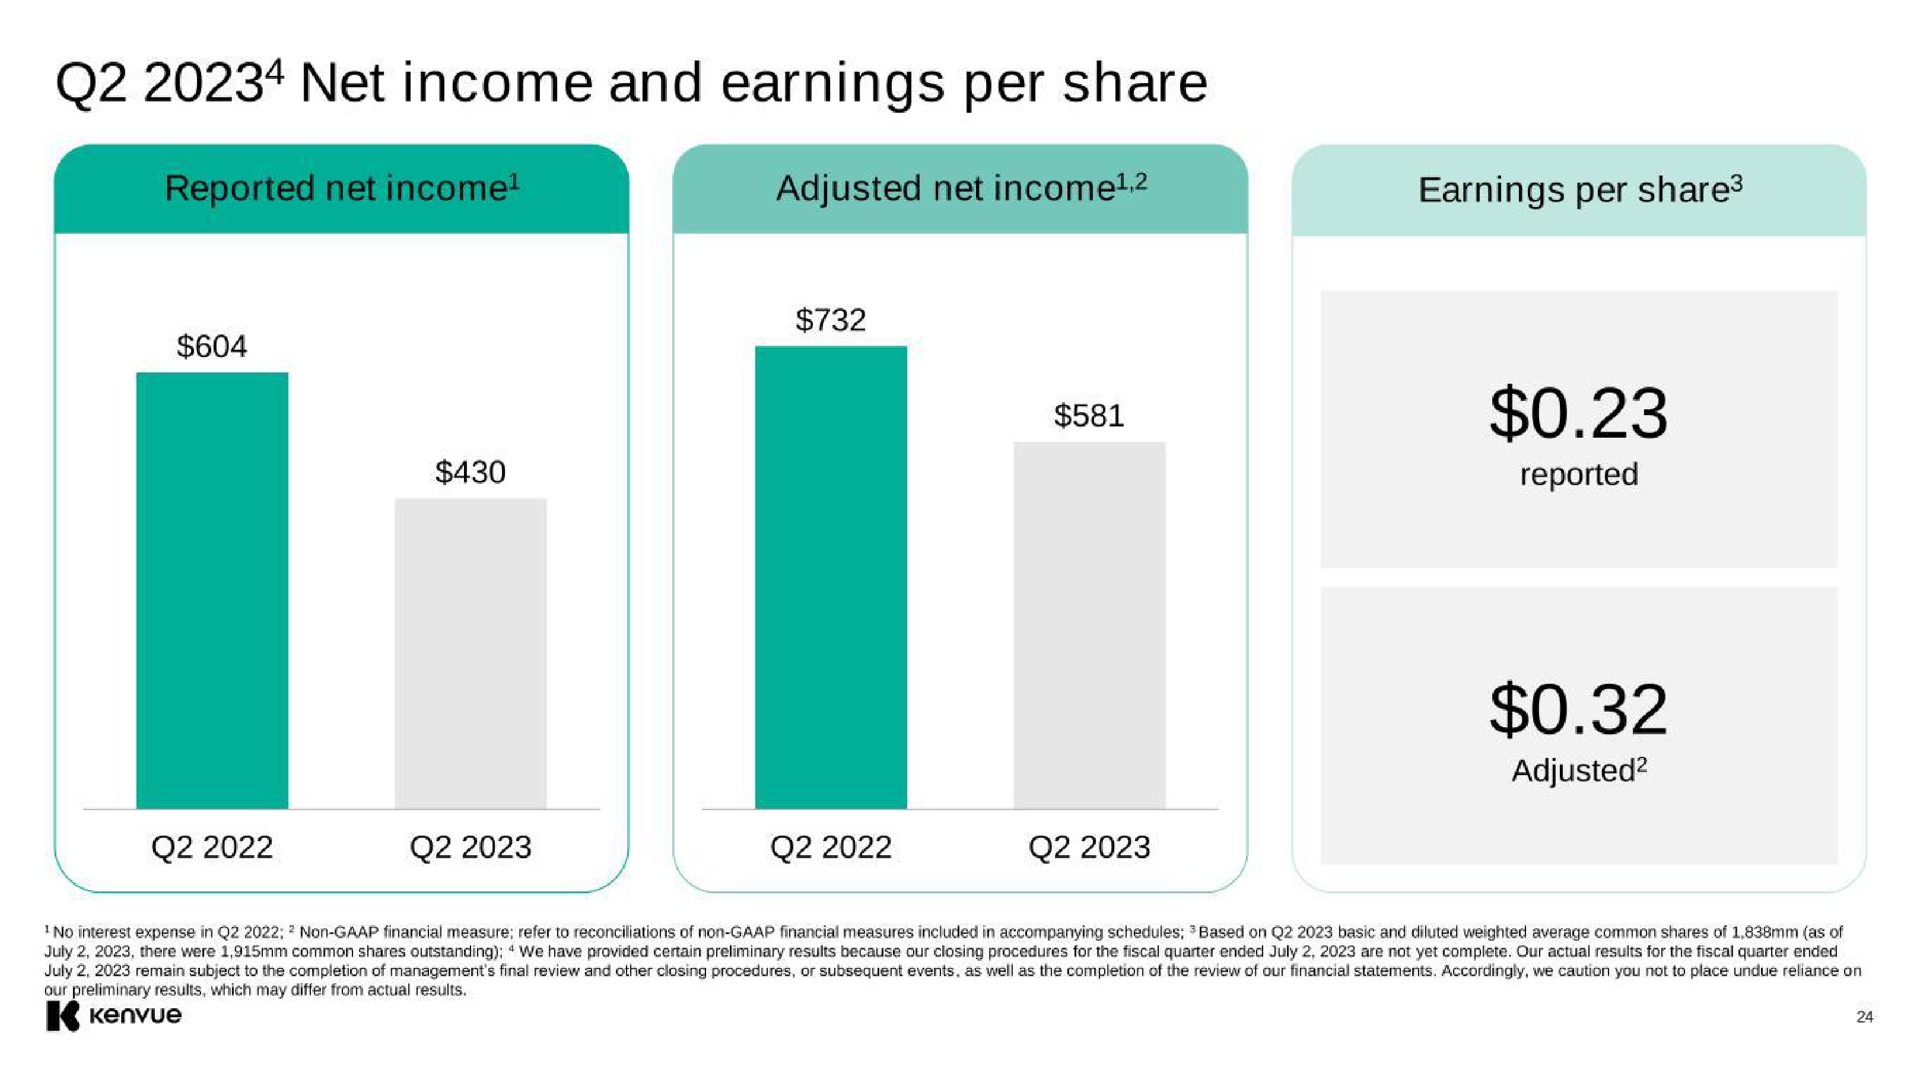 net income and earnings per share | Kenvue